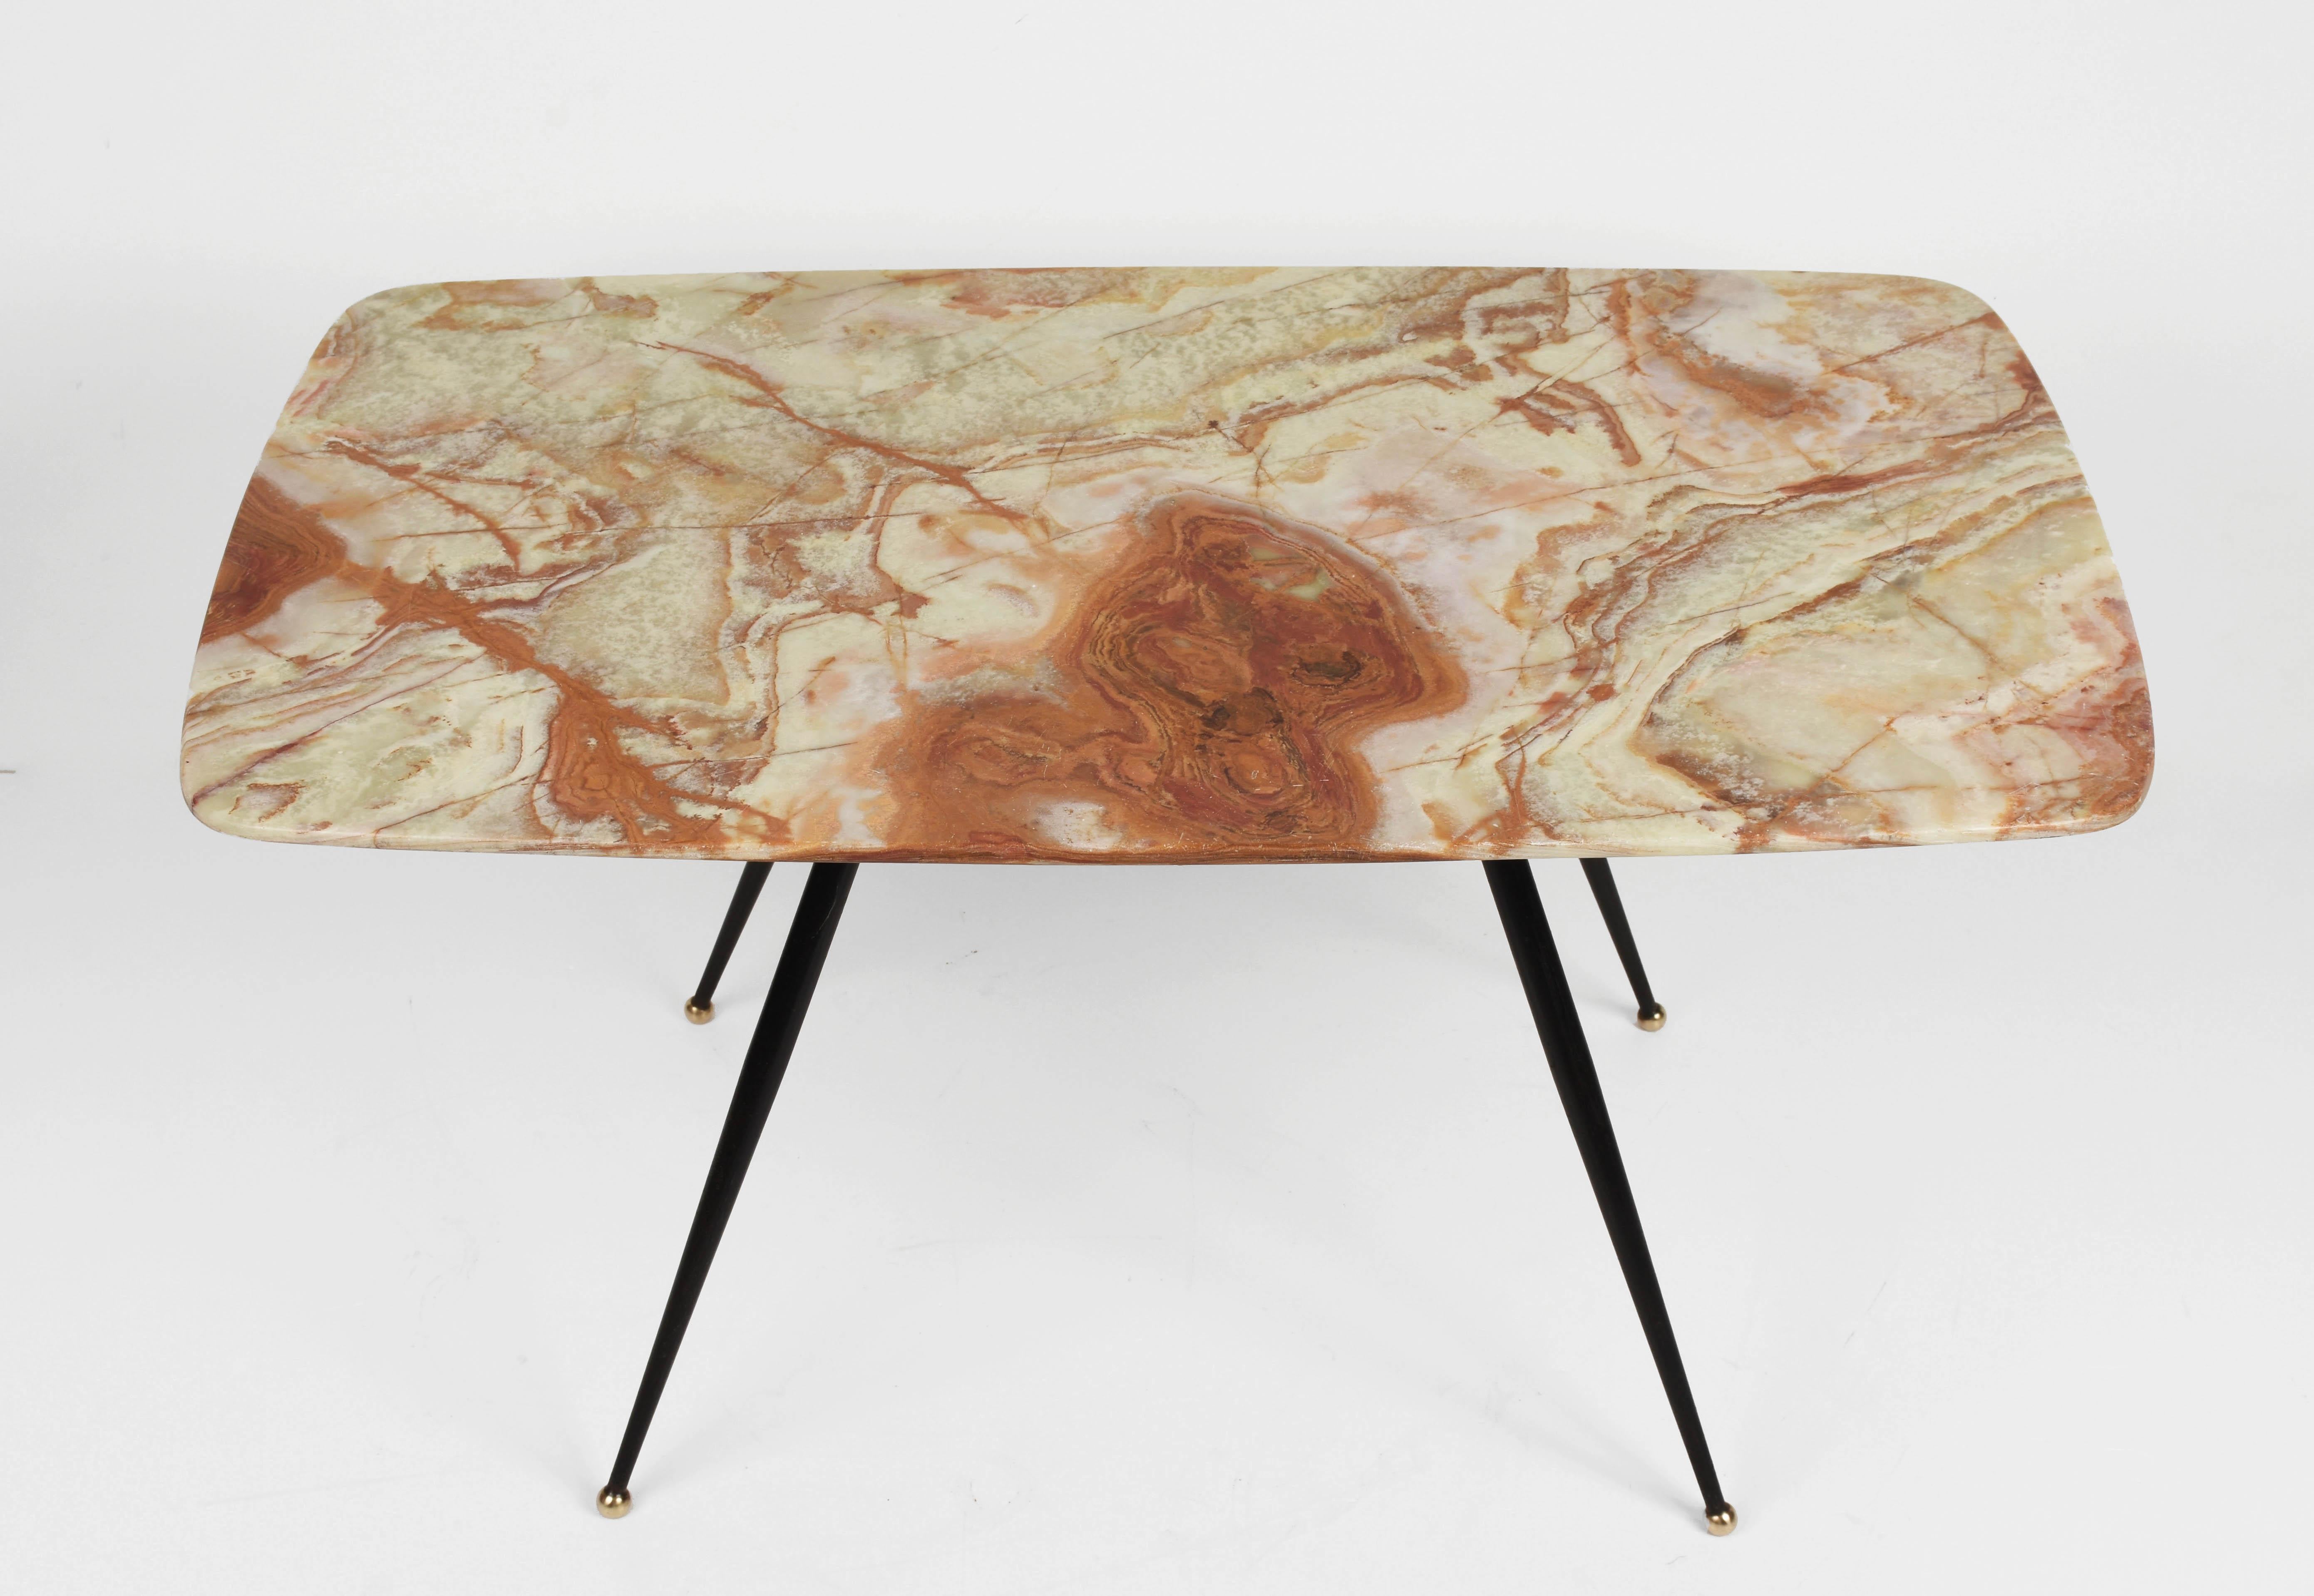 Beautiful and unique midcentury pink and green onyx marble coffee table with brass feet. This amazing piece was produced in Italy during 1950s.

This piece is fantastic as the marble top has the Classic shape the Italian design of the 1950s. The